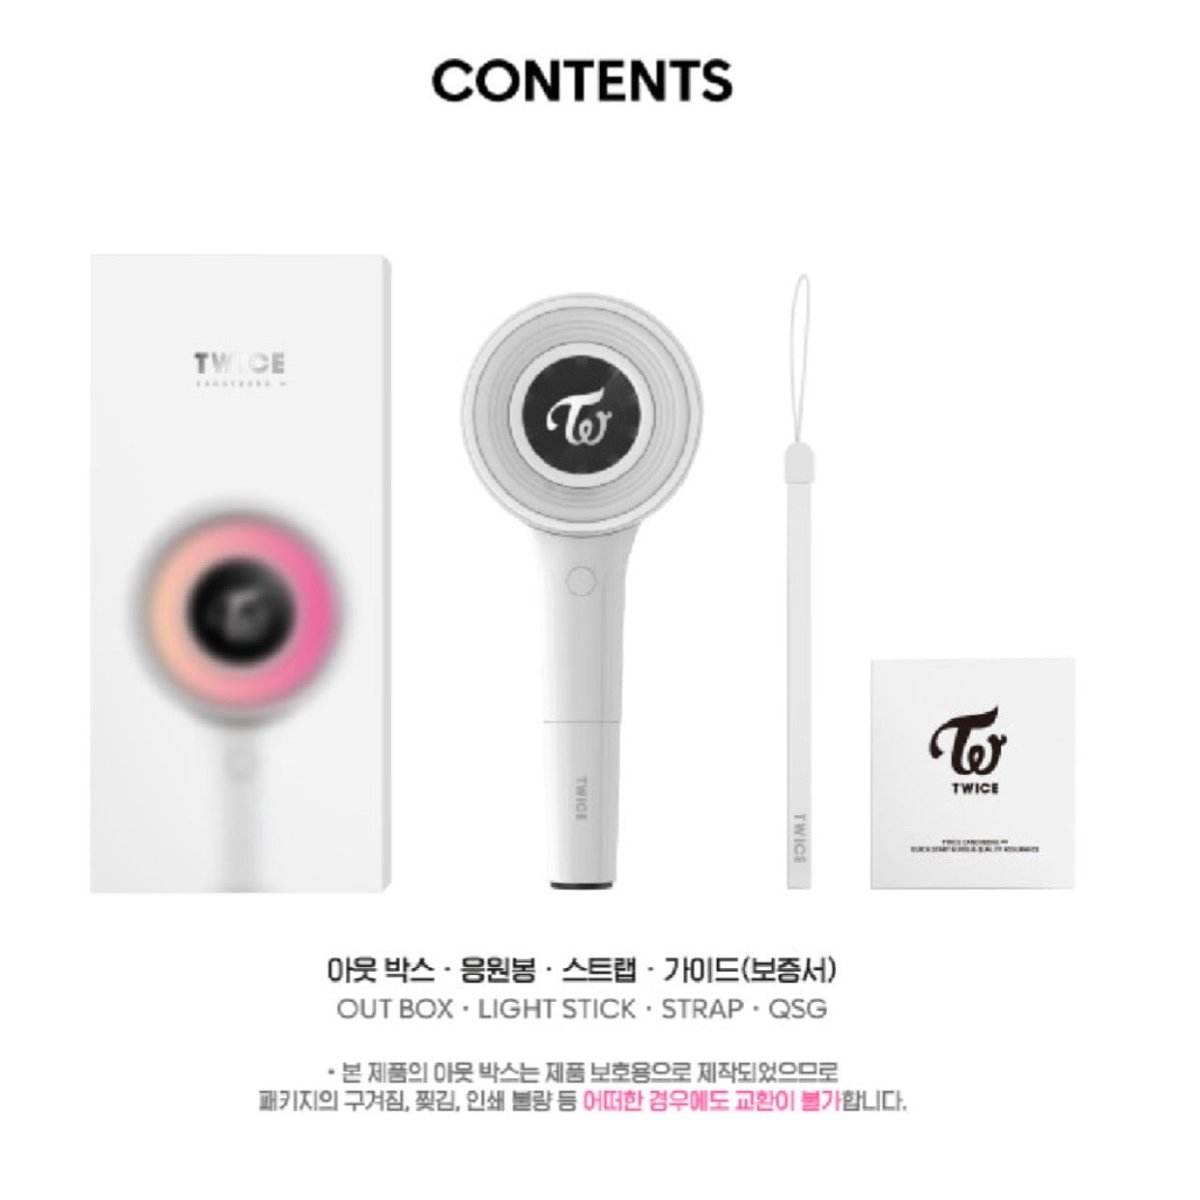 TWICE Official CANDY BONG INFINITY Light Stick Version 3